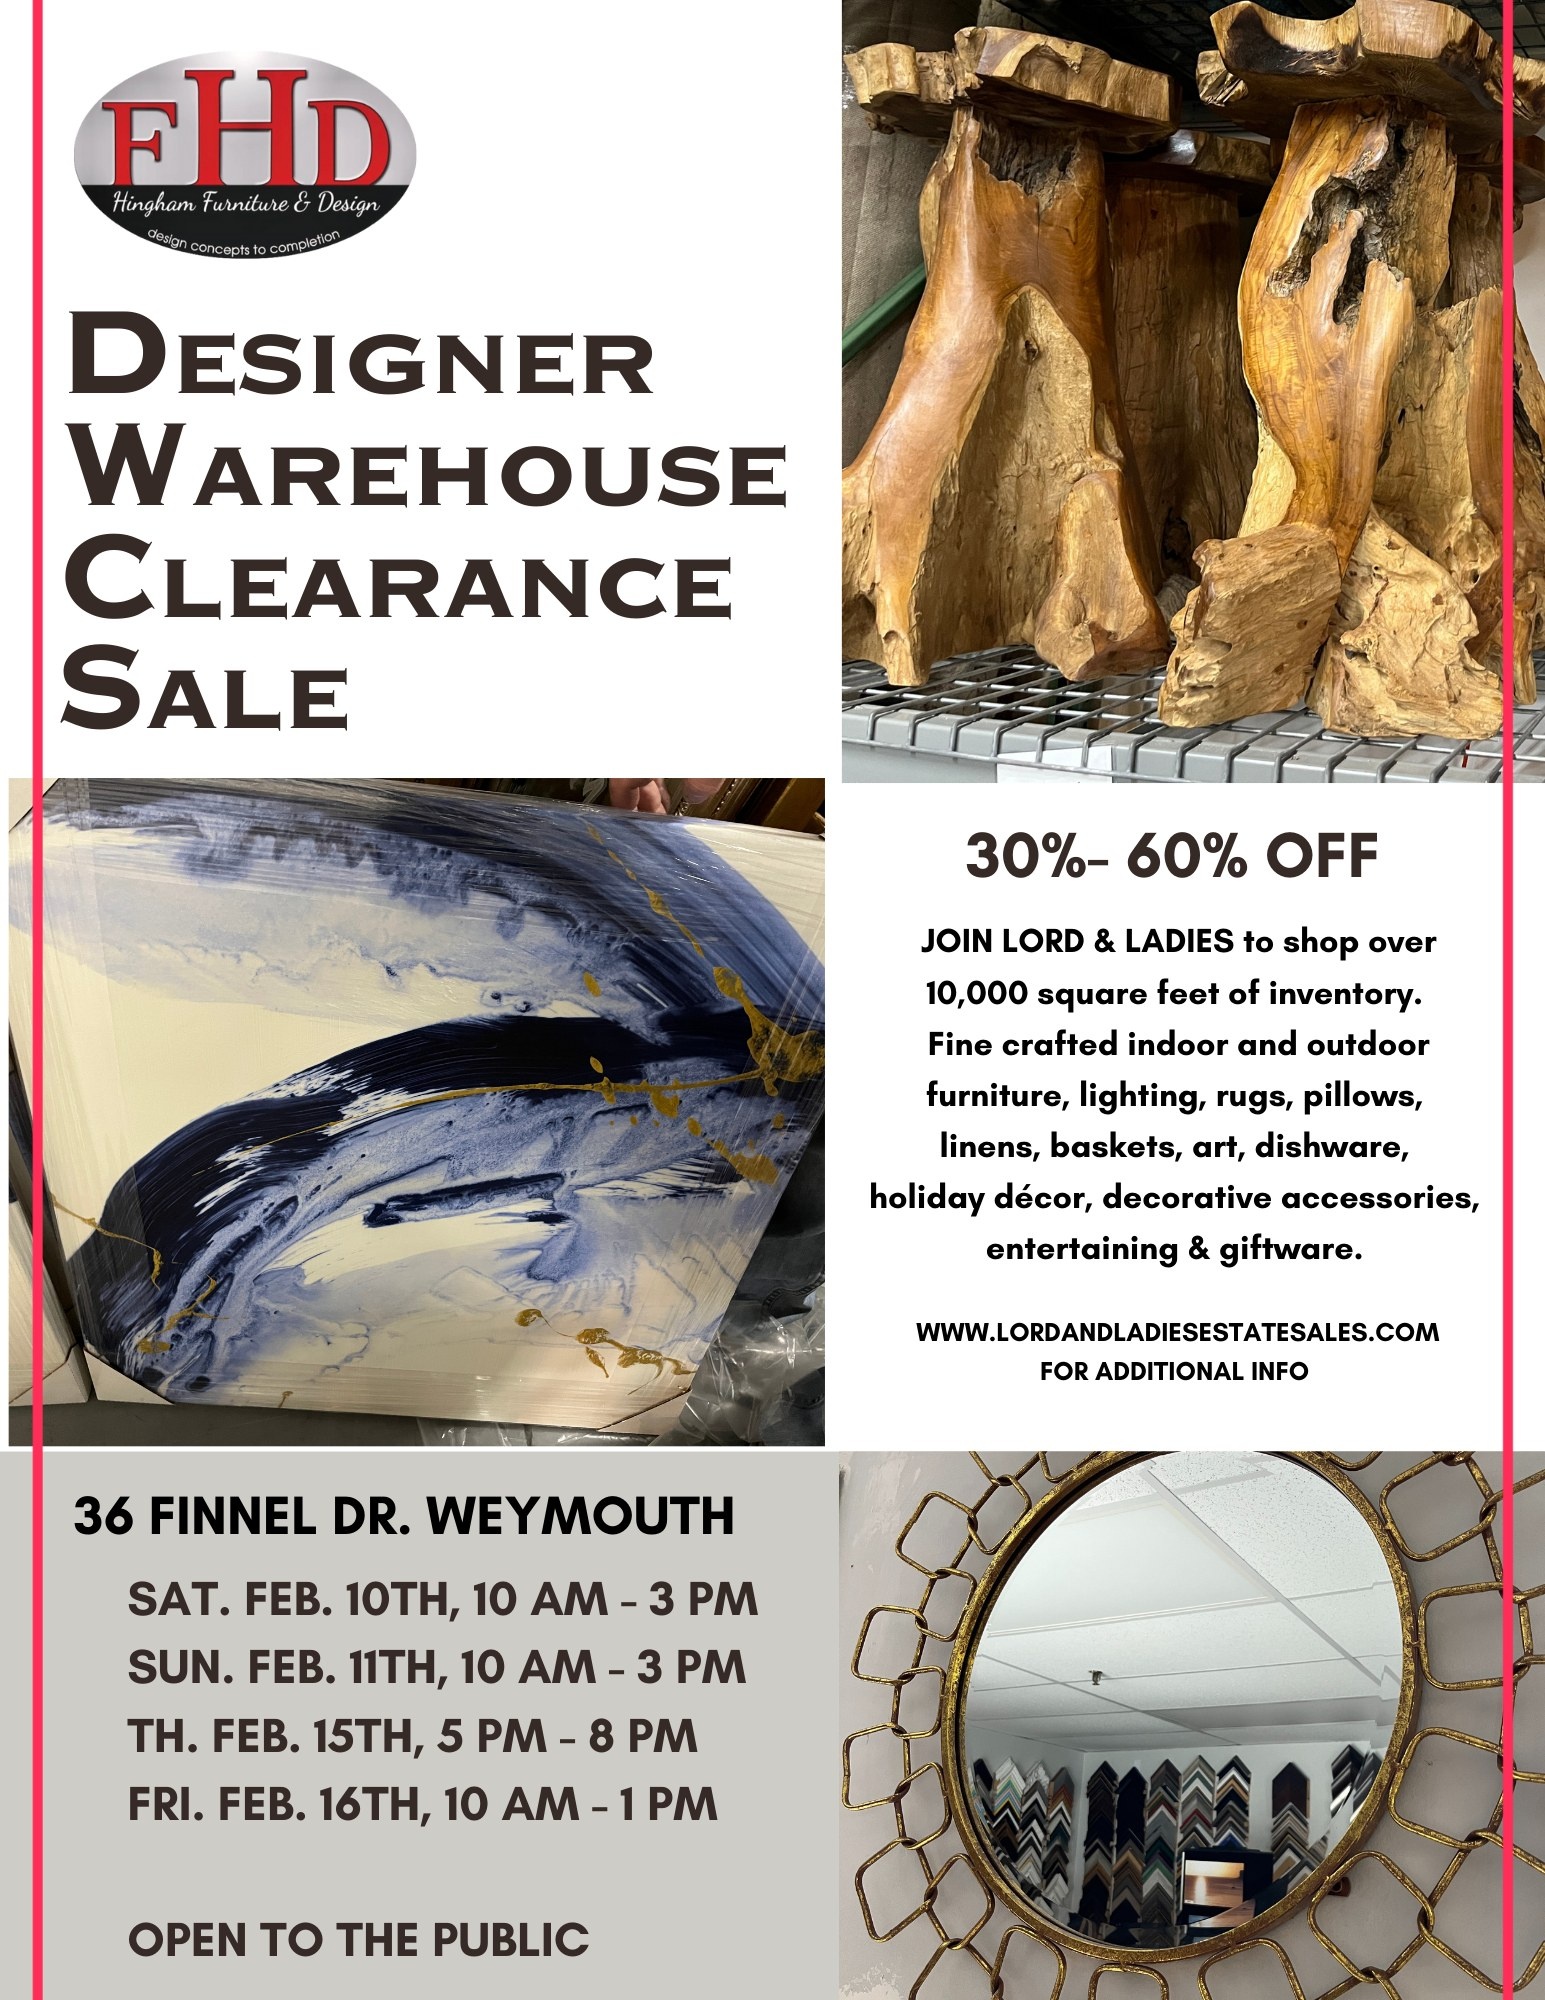 Lord and Ladies Estate Sales Designer Warehouse Clearance Sale